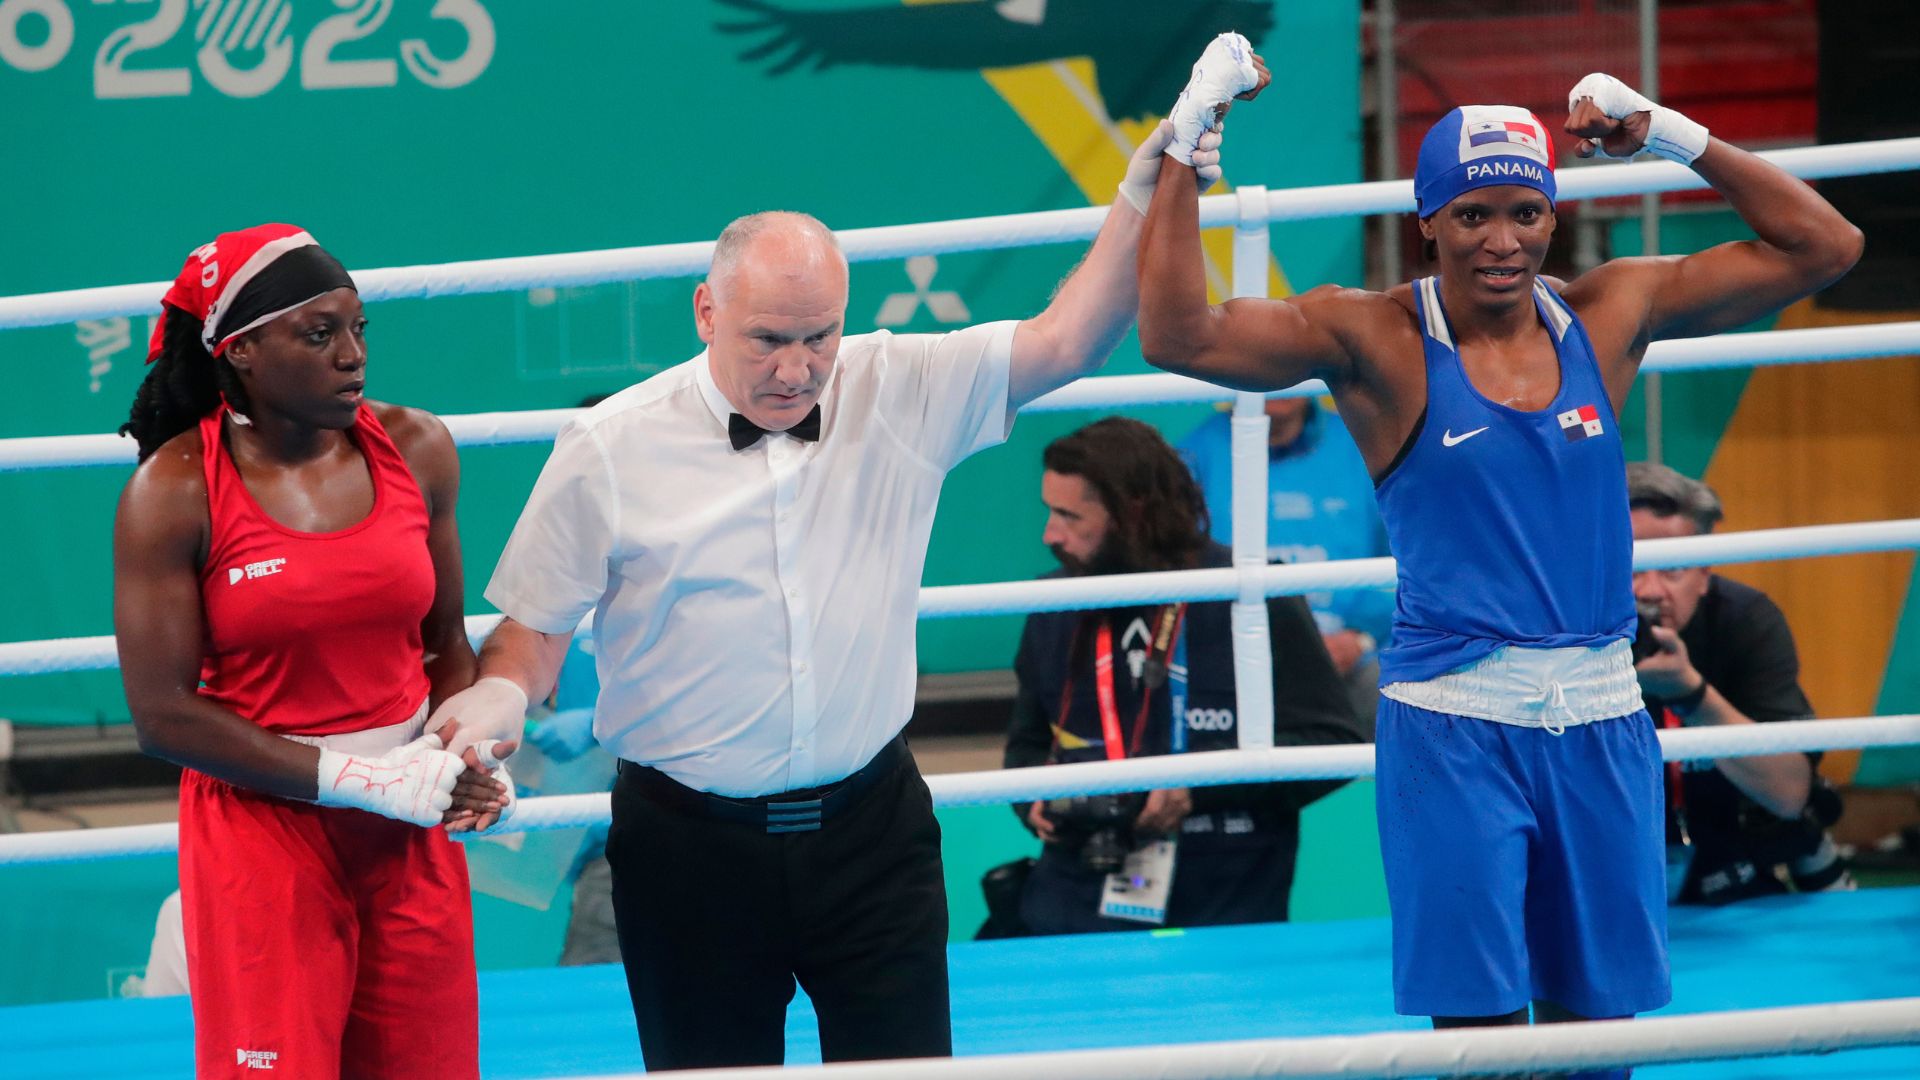 Female Boxing: Panamanian Bylon won with "Mano de Piedra" in the Stands